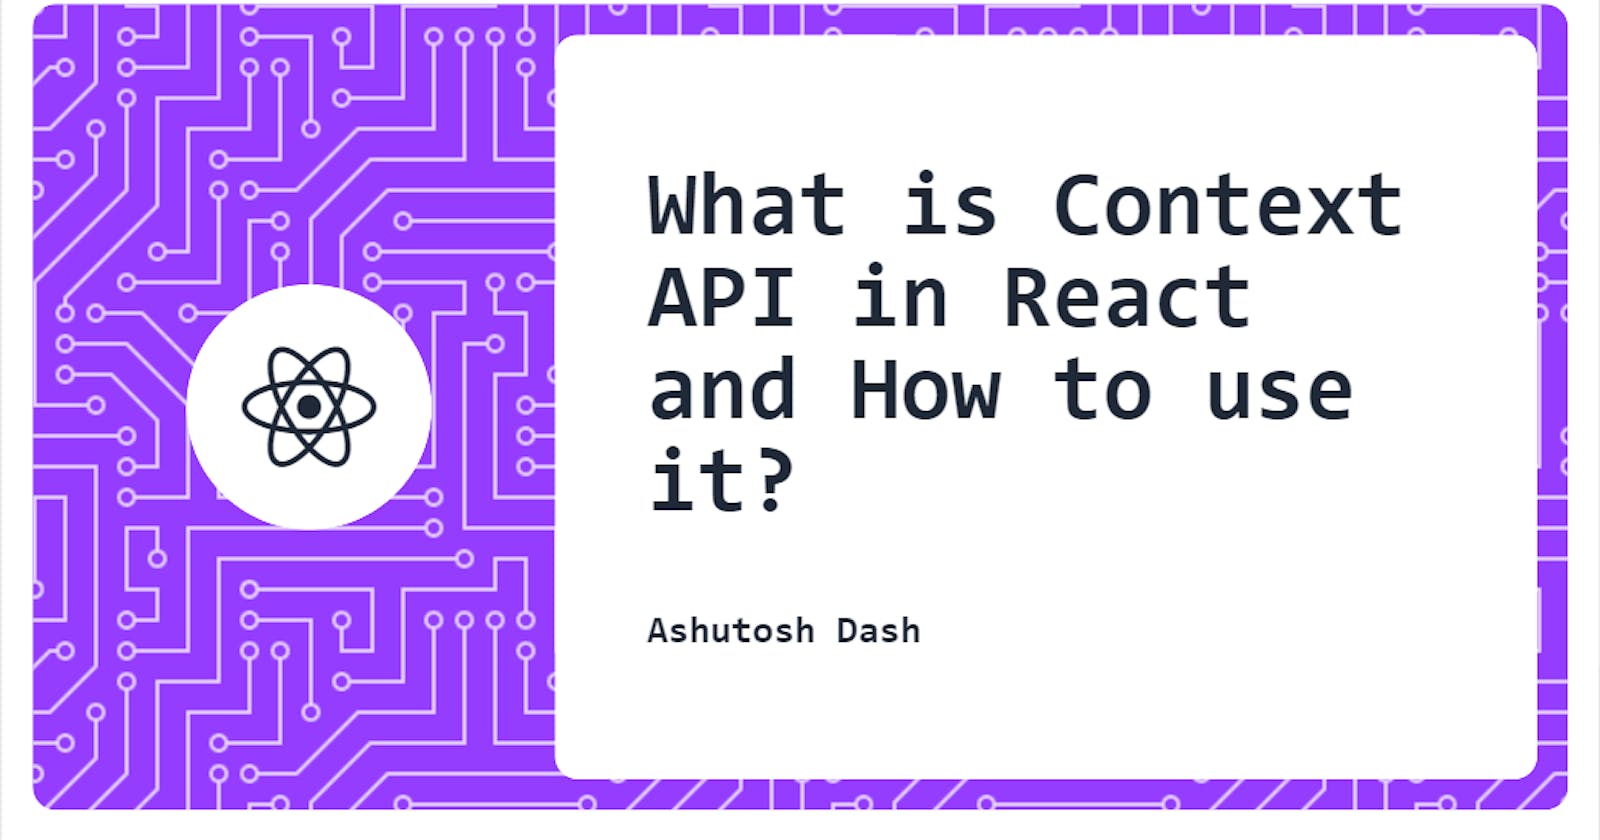 What is Context API in React and how to use it?